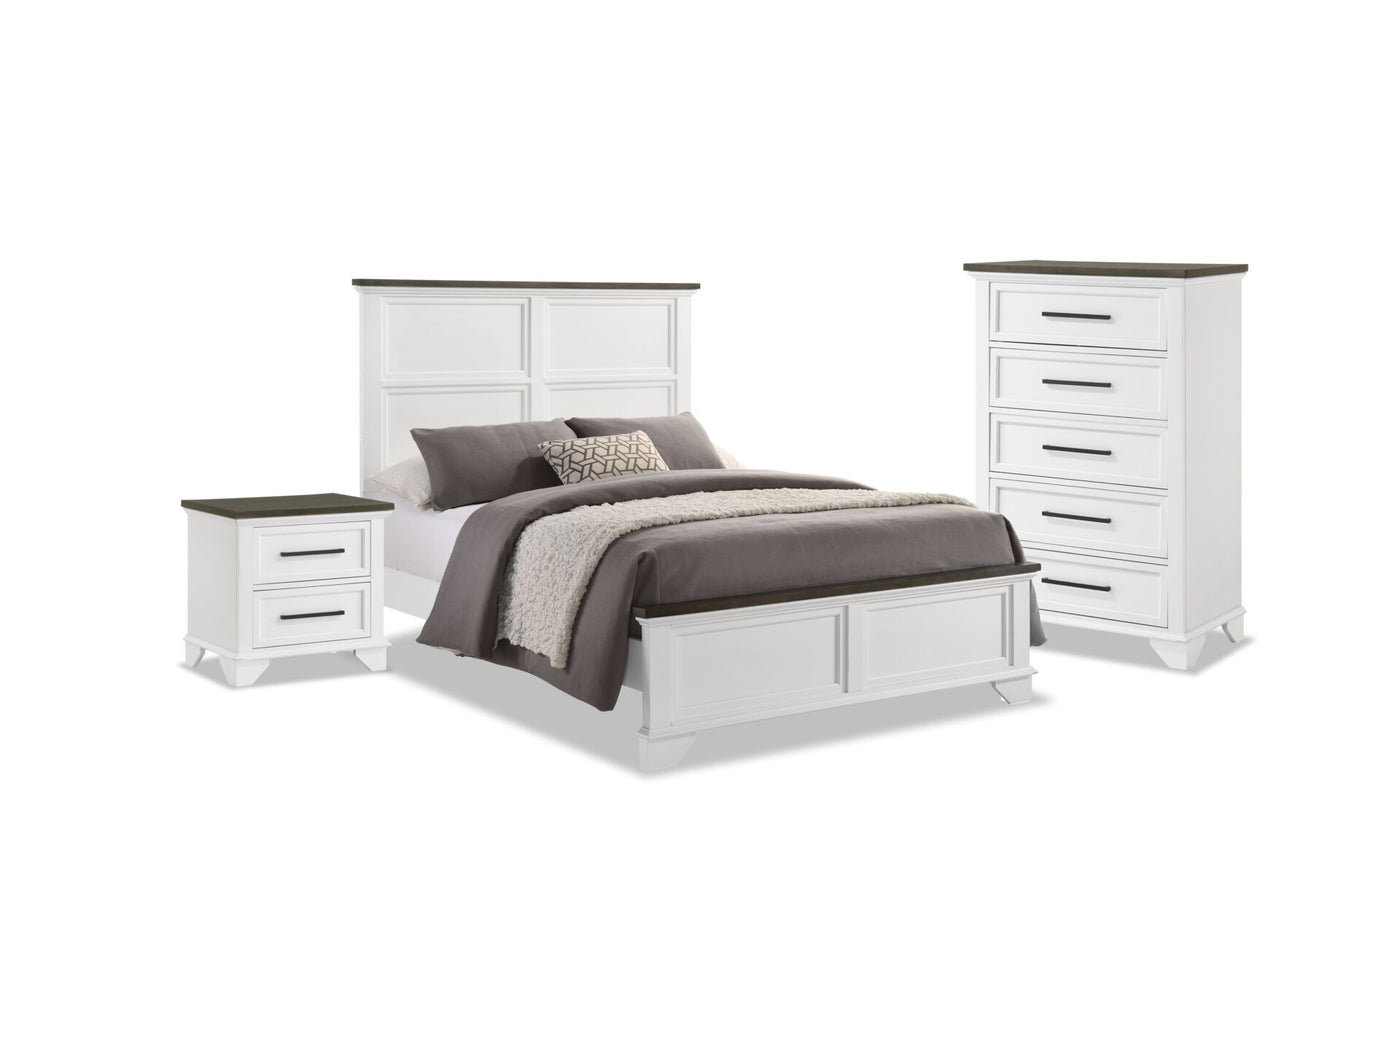 Abigail 5-Piece Full Bedroom Package - White and Grey